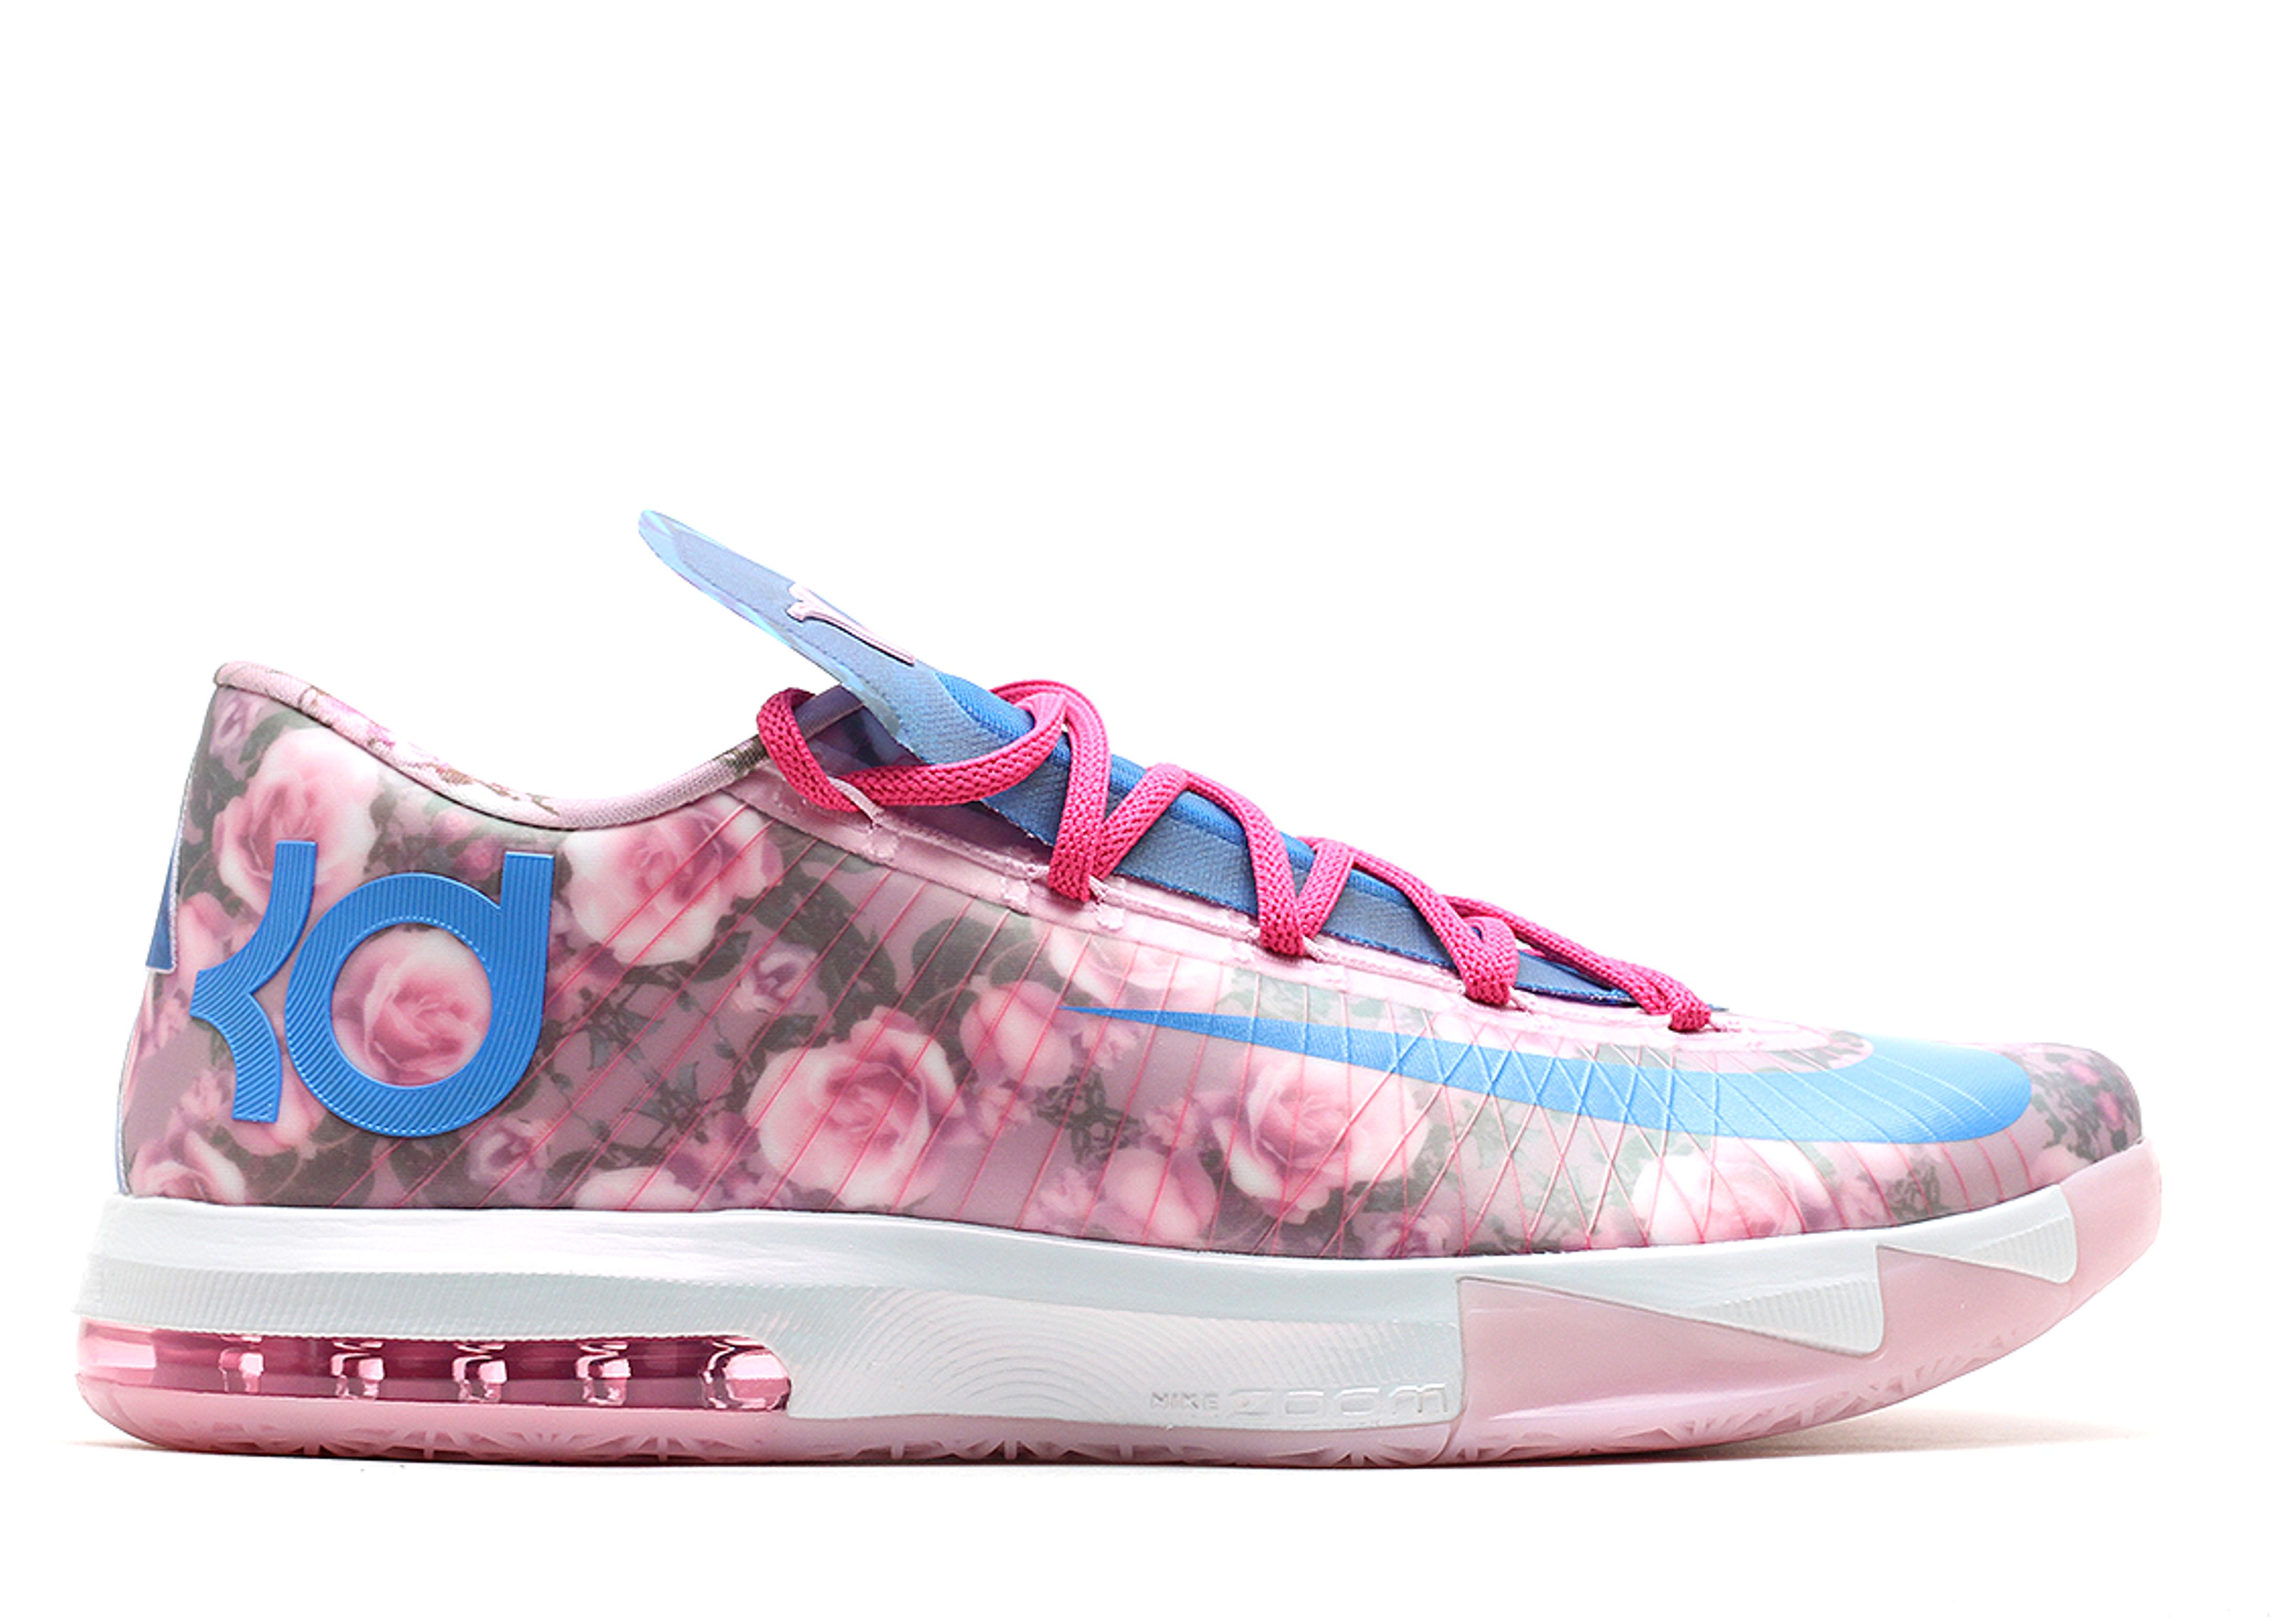 kd 1 aunt pearl